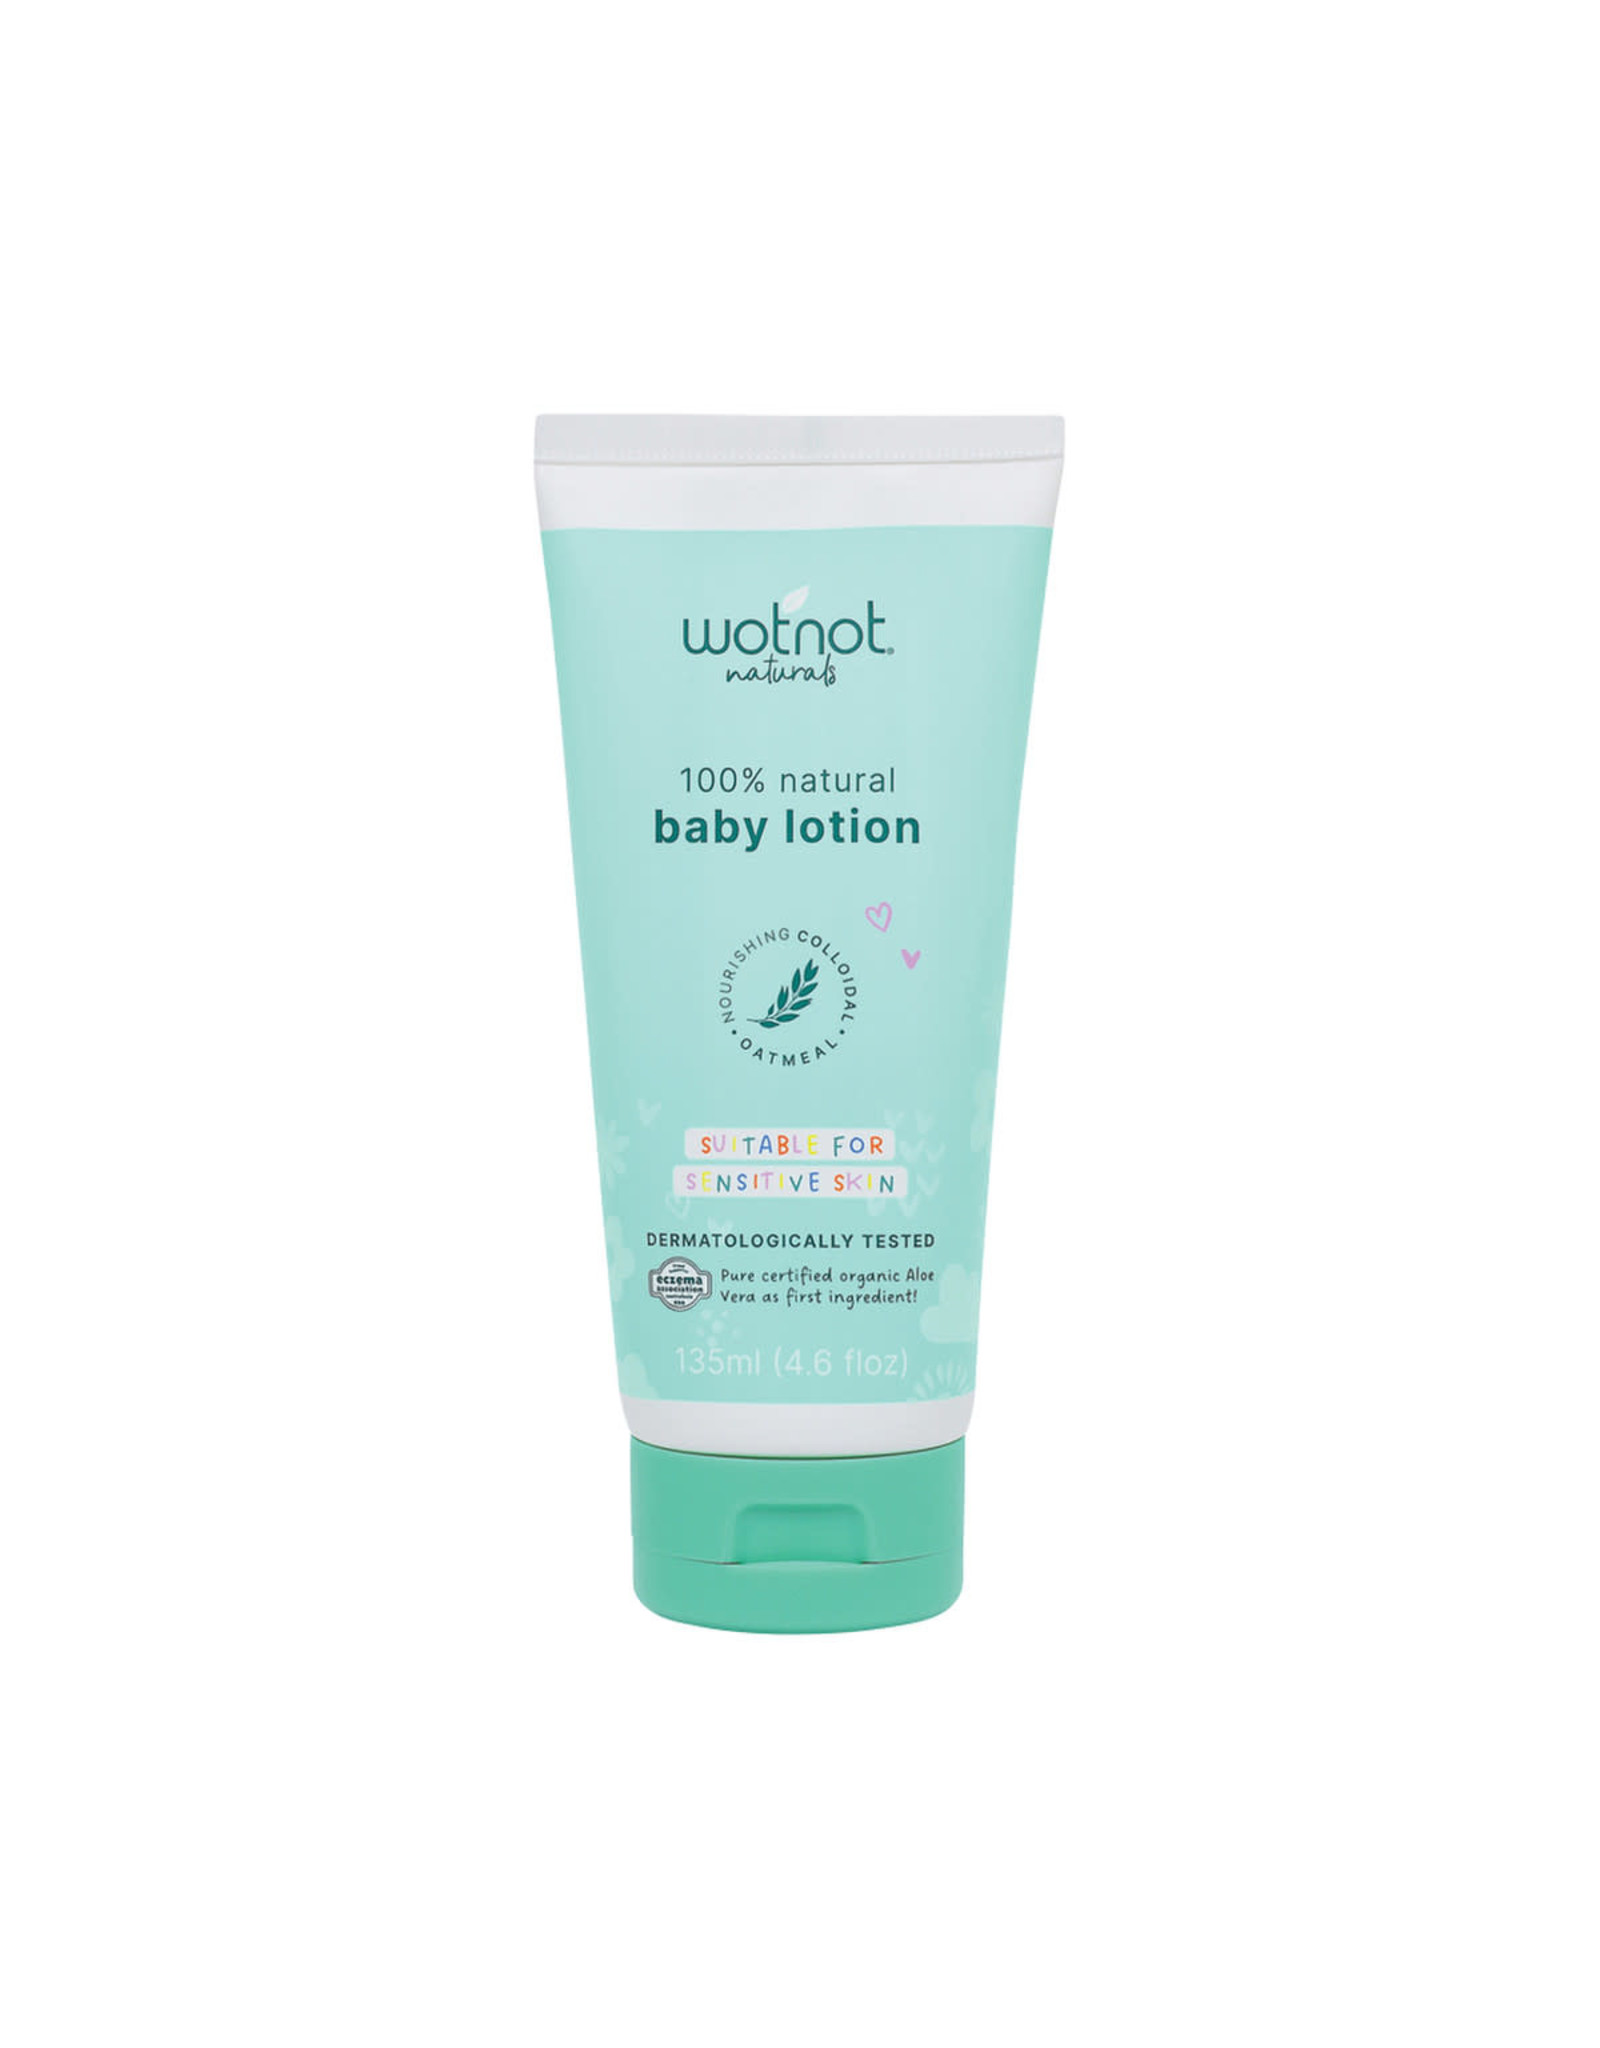 Wotnot 100% Natural Baby Lotion - 135ml